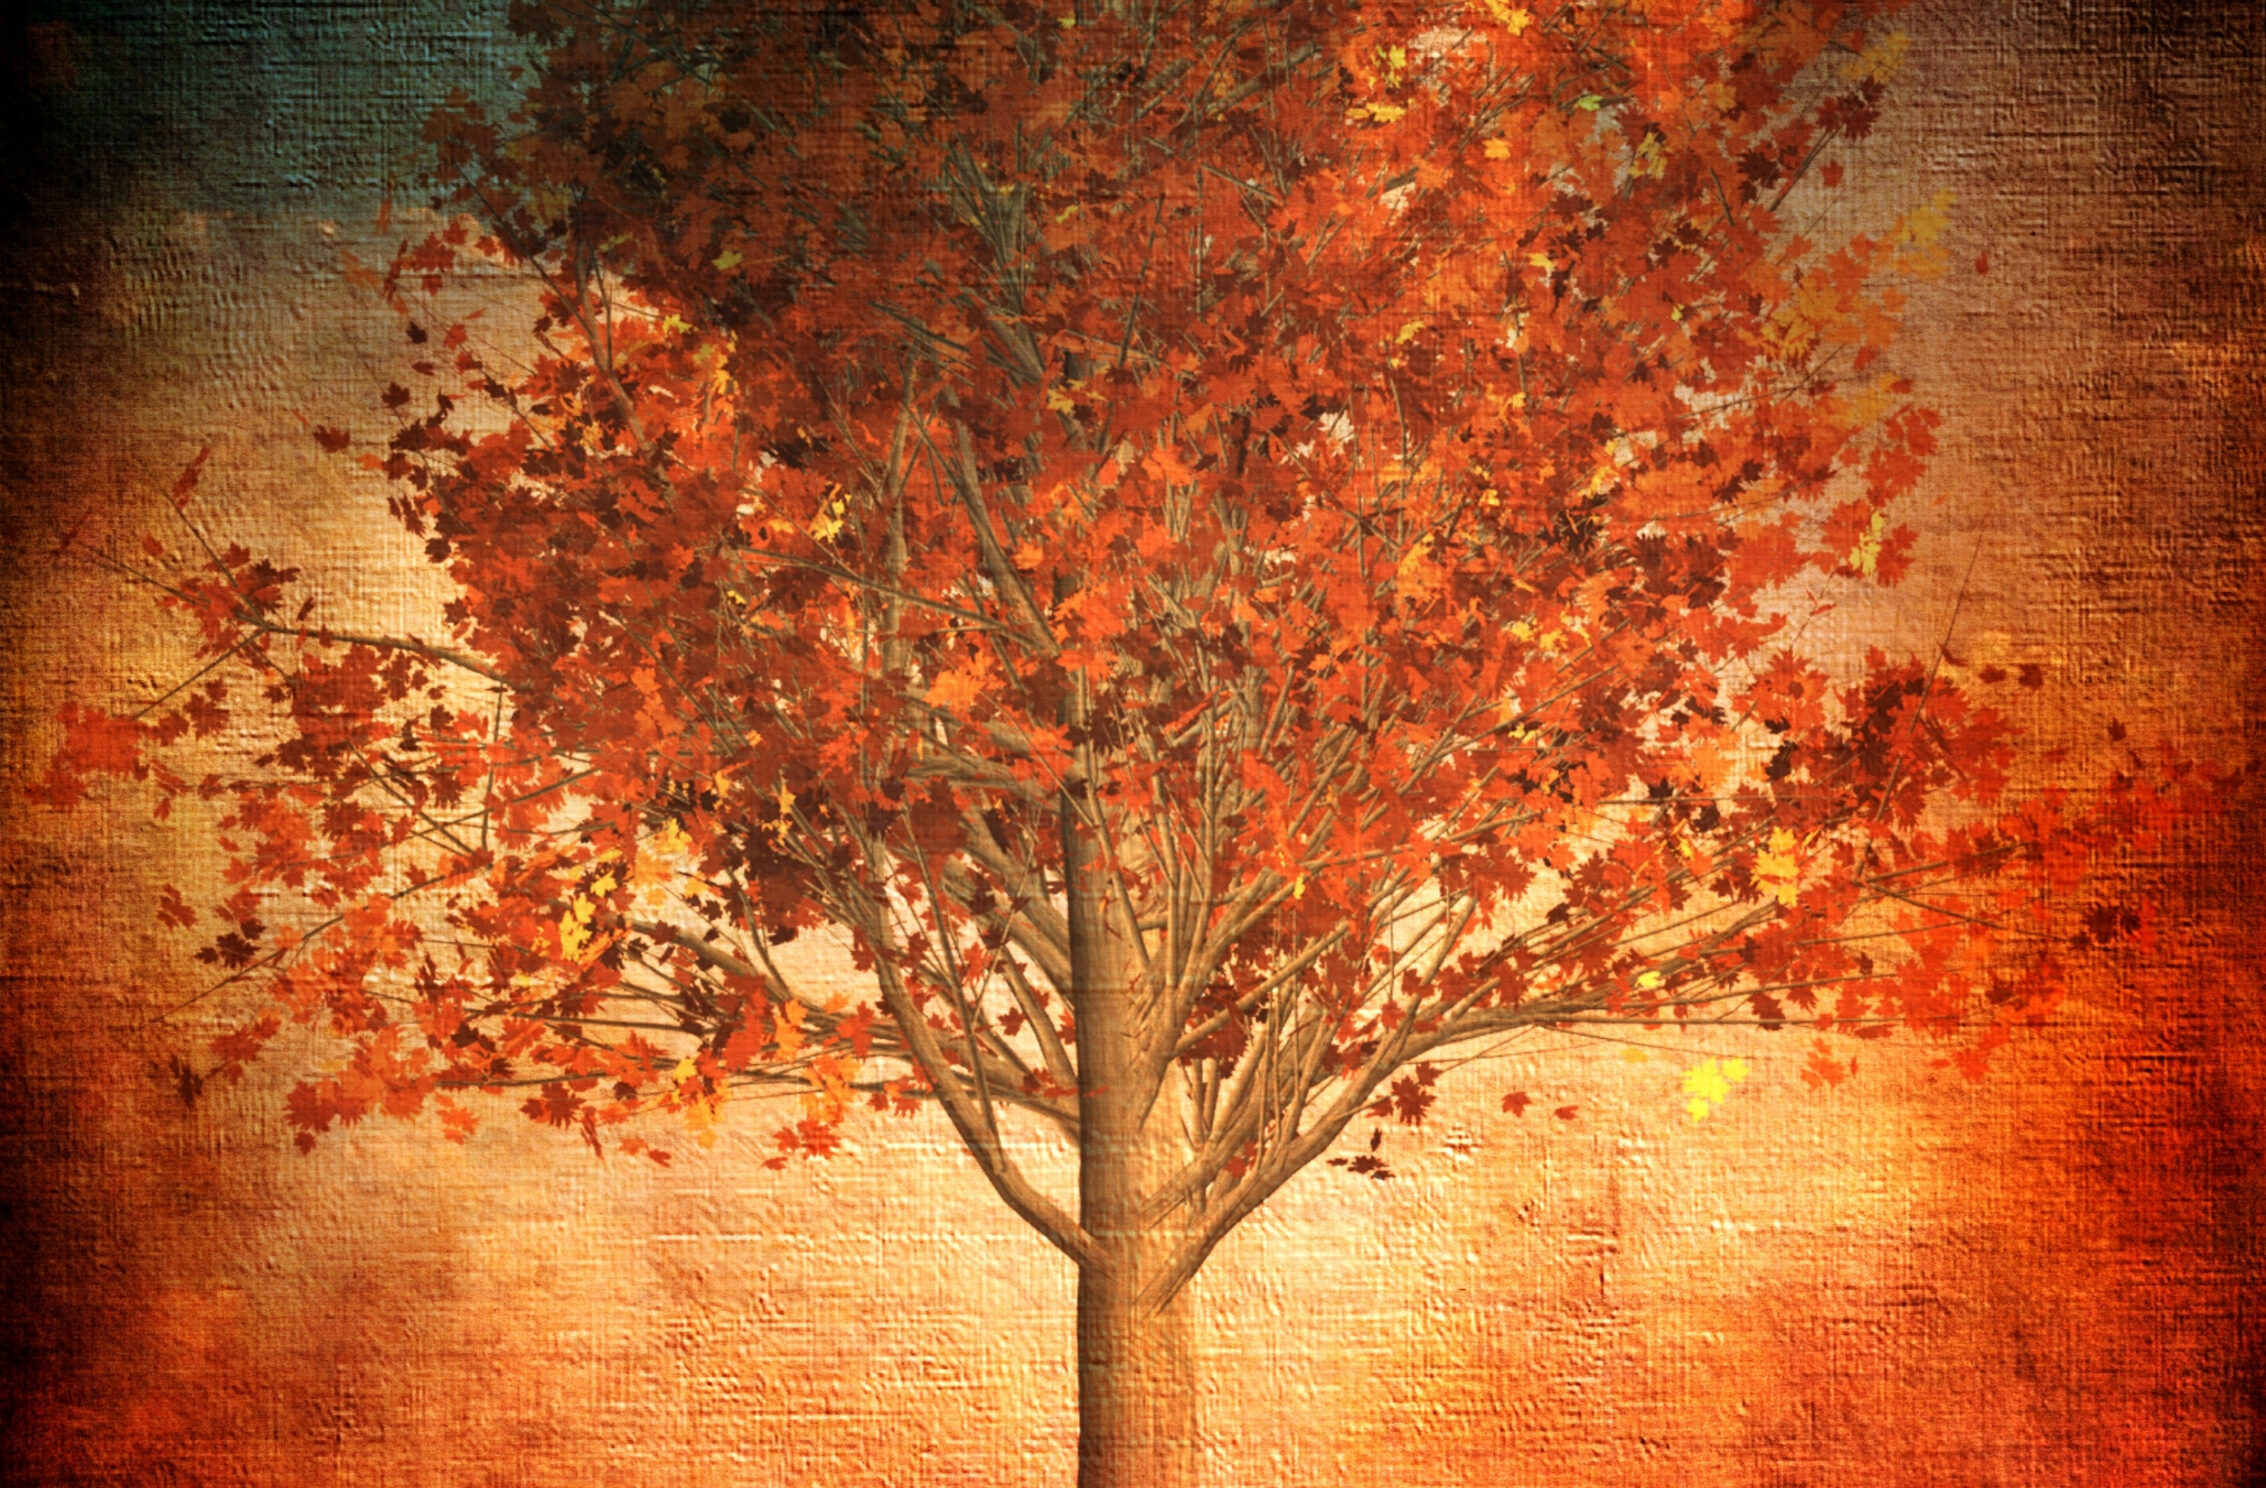 2266x1488 wallpaper Aesthetic Autumn Red Fall Leaves Nature iPad Wallpaper 2266x1488 pixels resolution